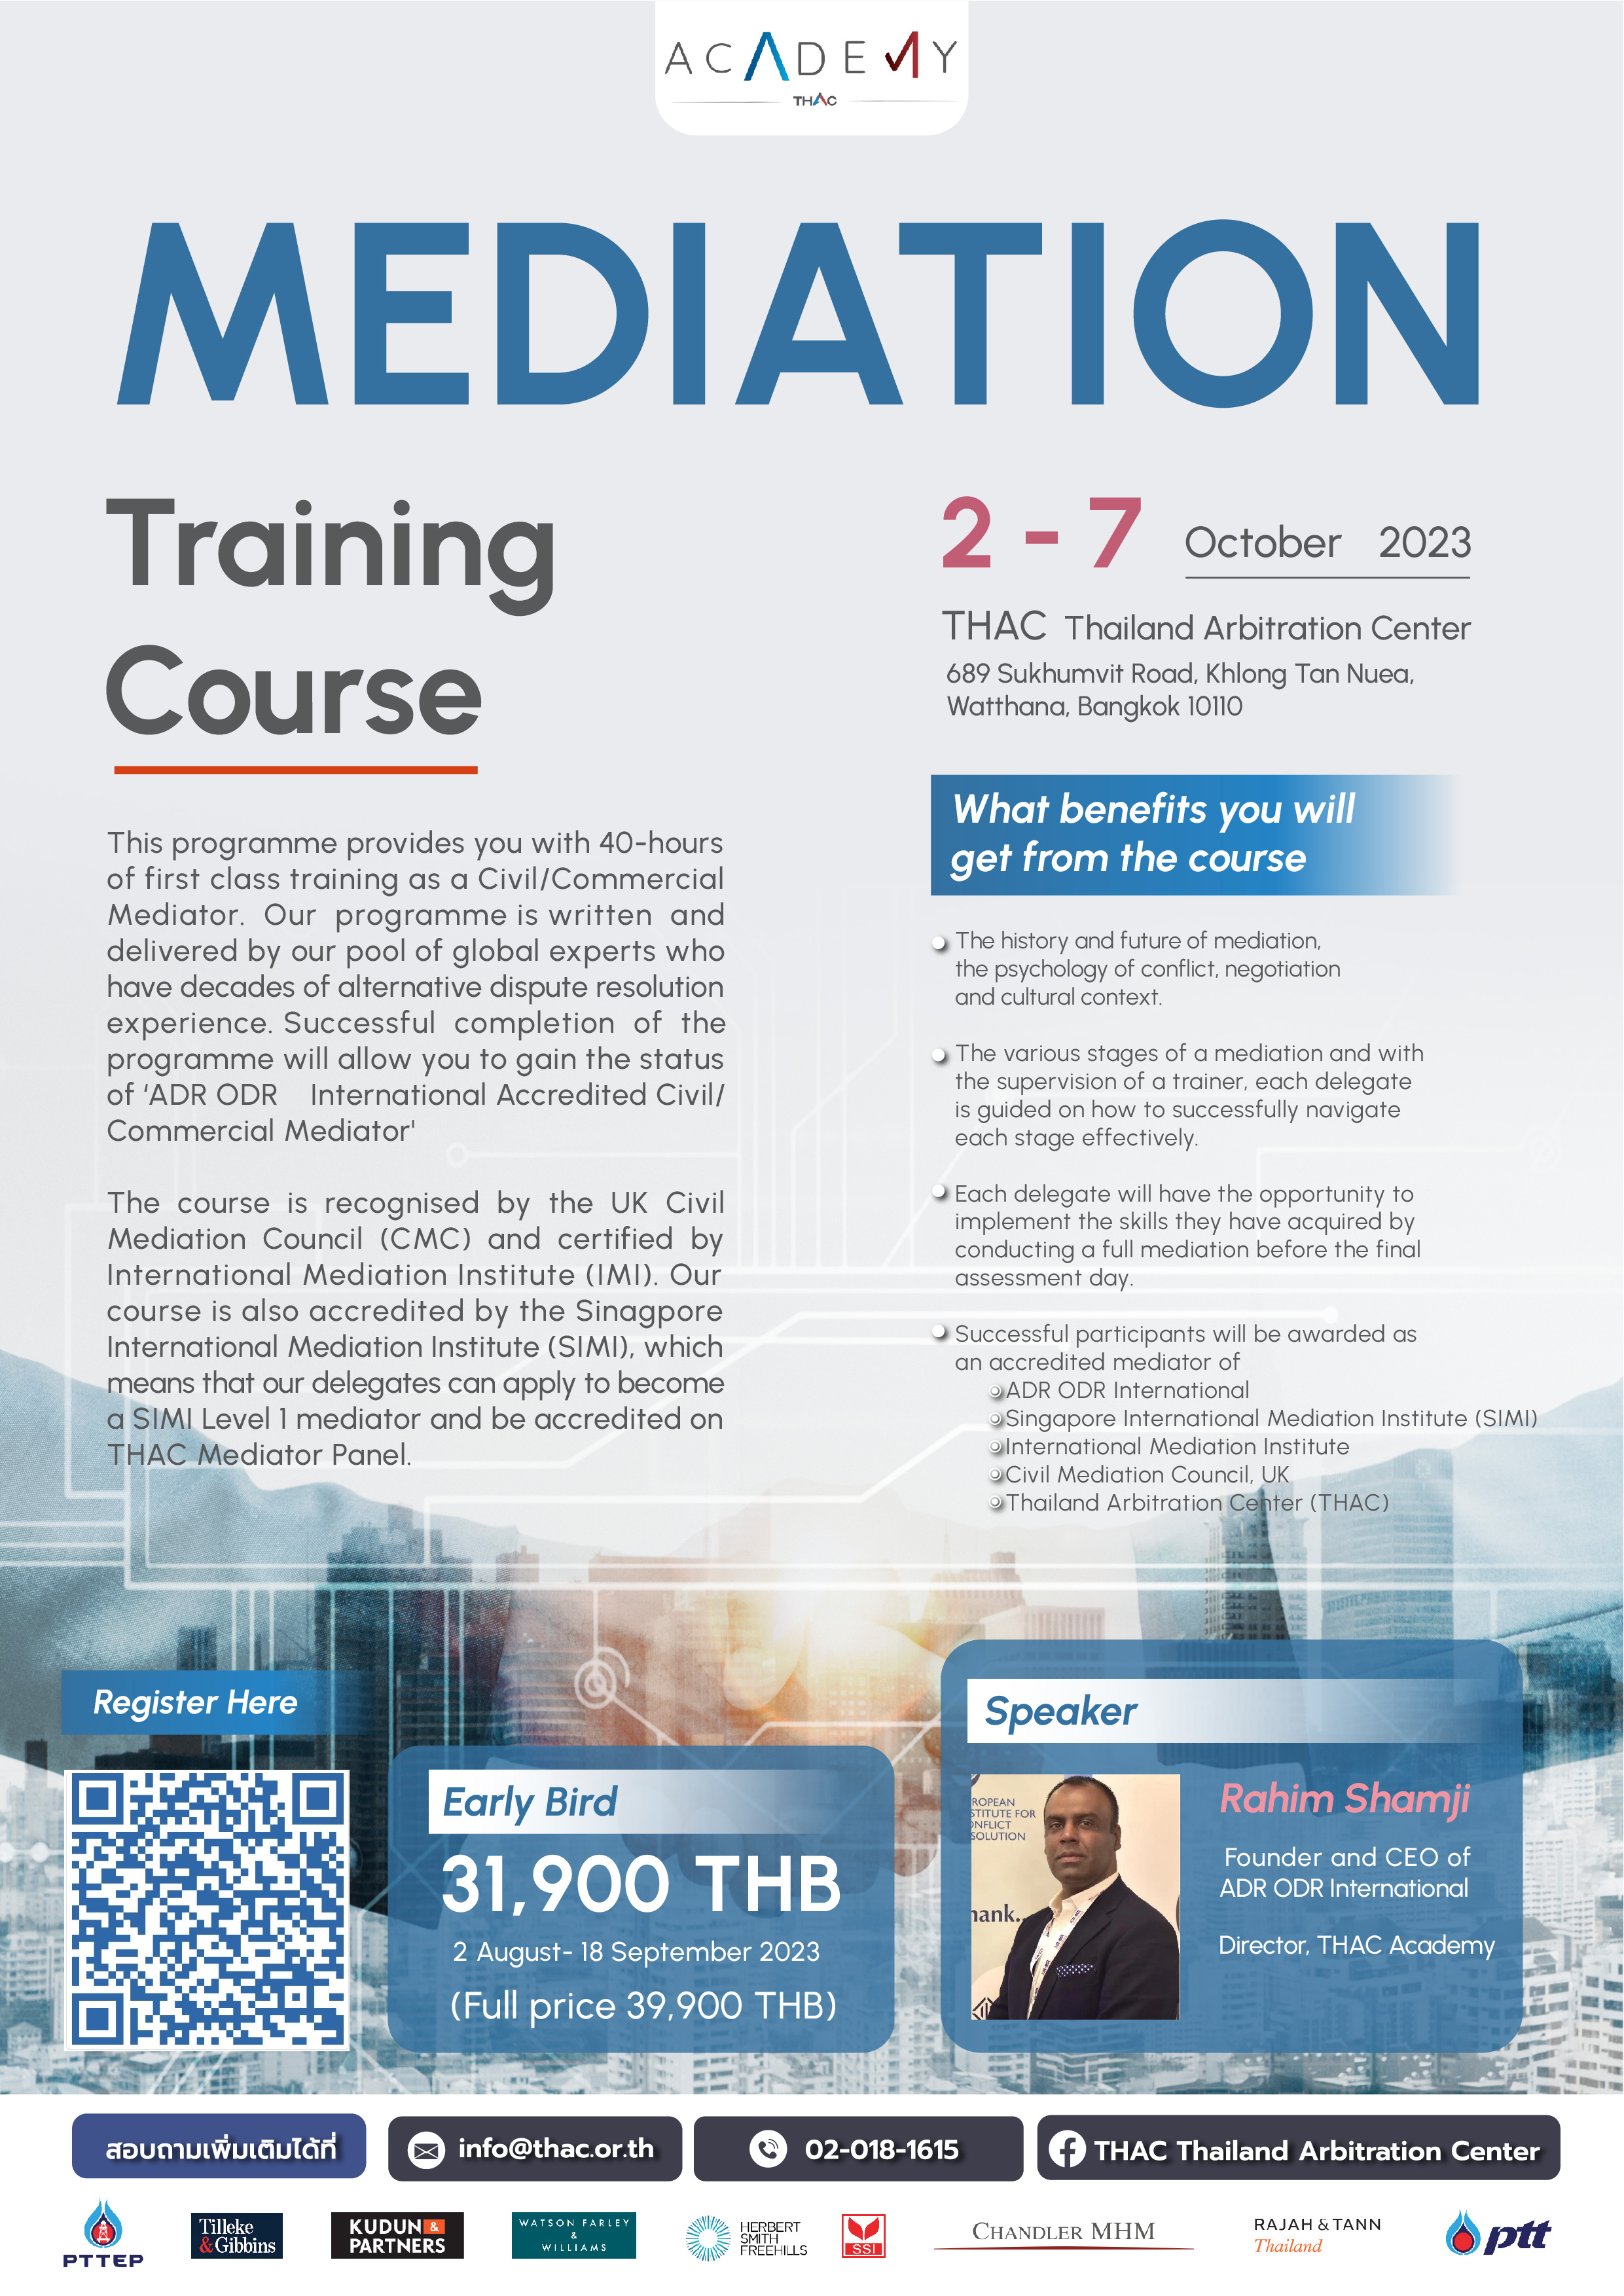 13th Mediation Training Course in Thailand